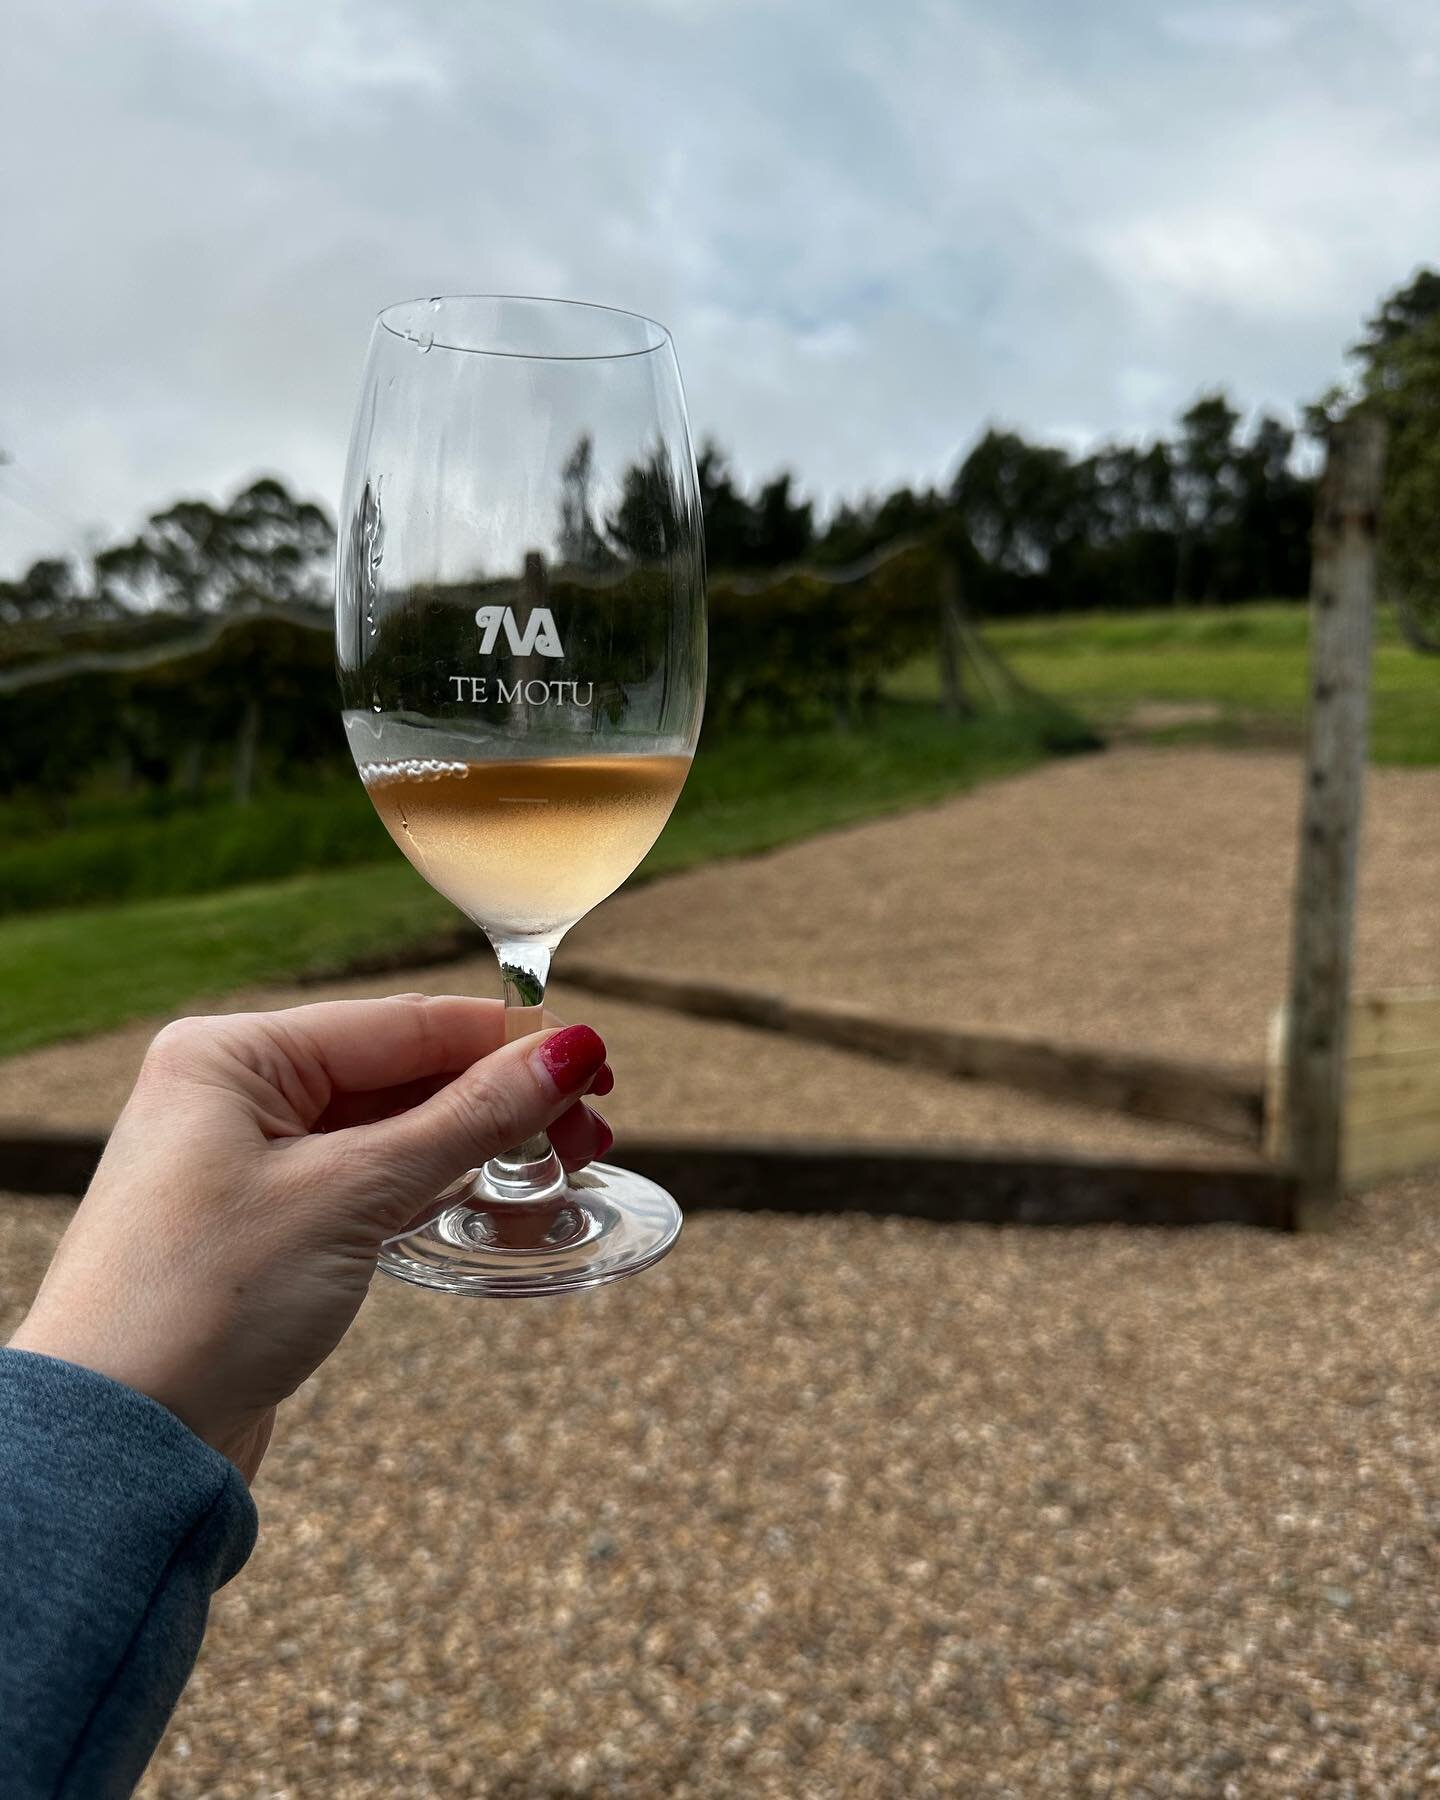 Yesterday was our first day of New Zealand wine-tasting. We took a ferry out to Waiheke Island (off the coast of Auckland) and then visited four wineries and had lunch.

The weather here is extremely changeable, lol. In one day it was cloudy, then su